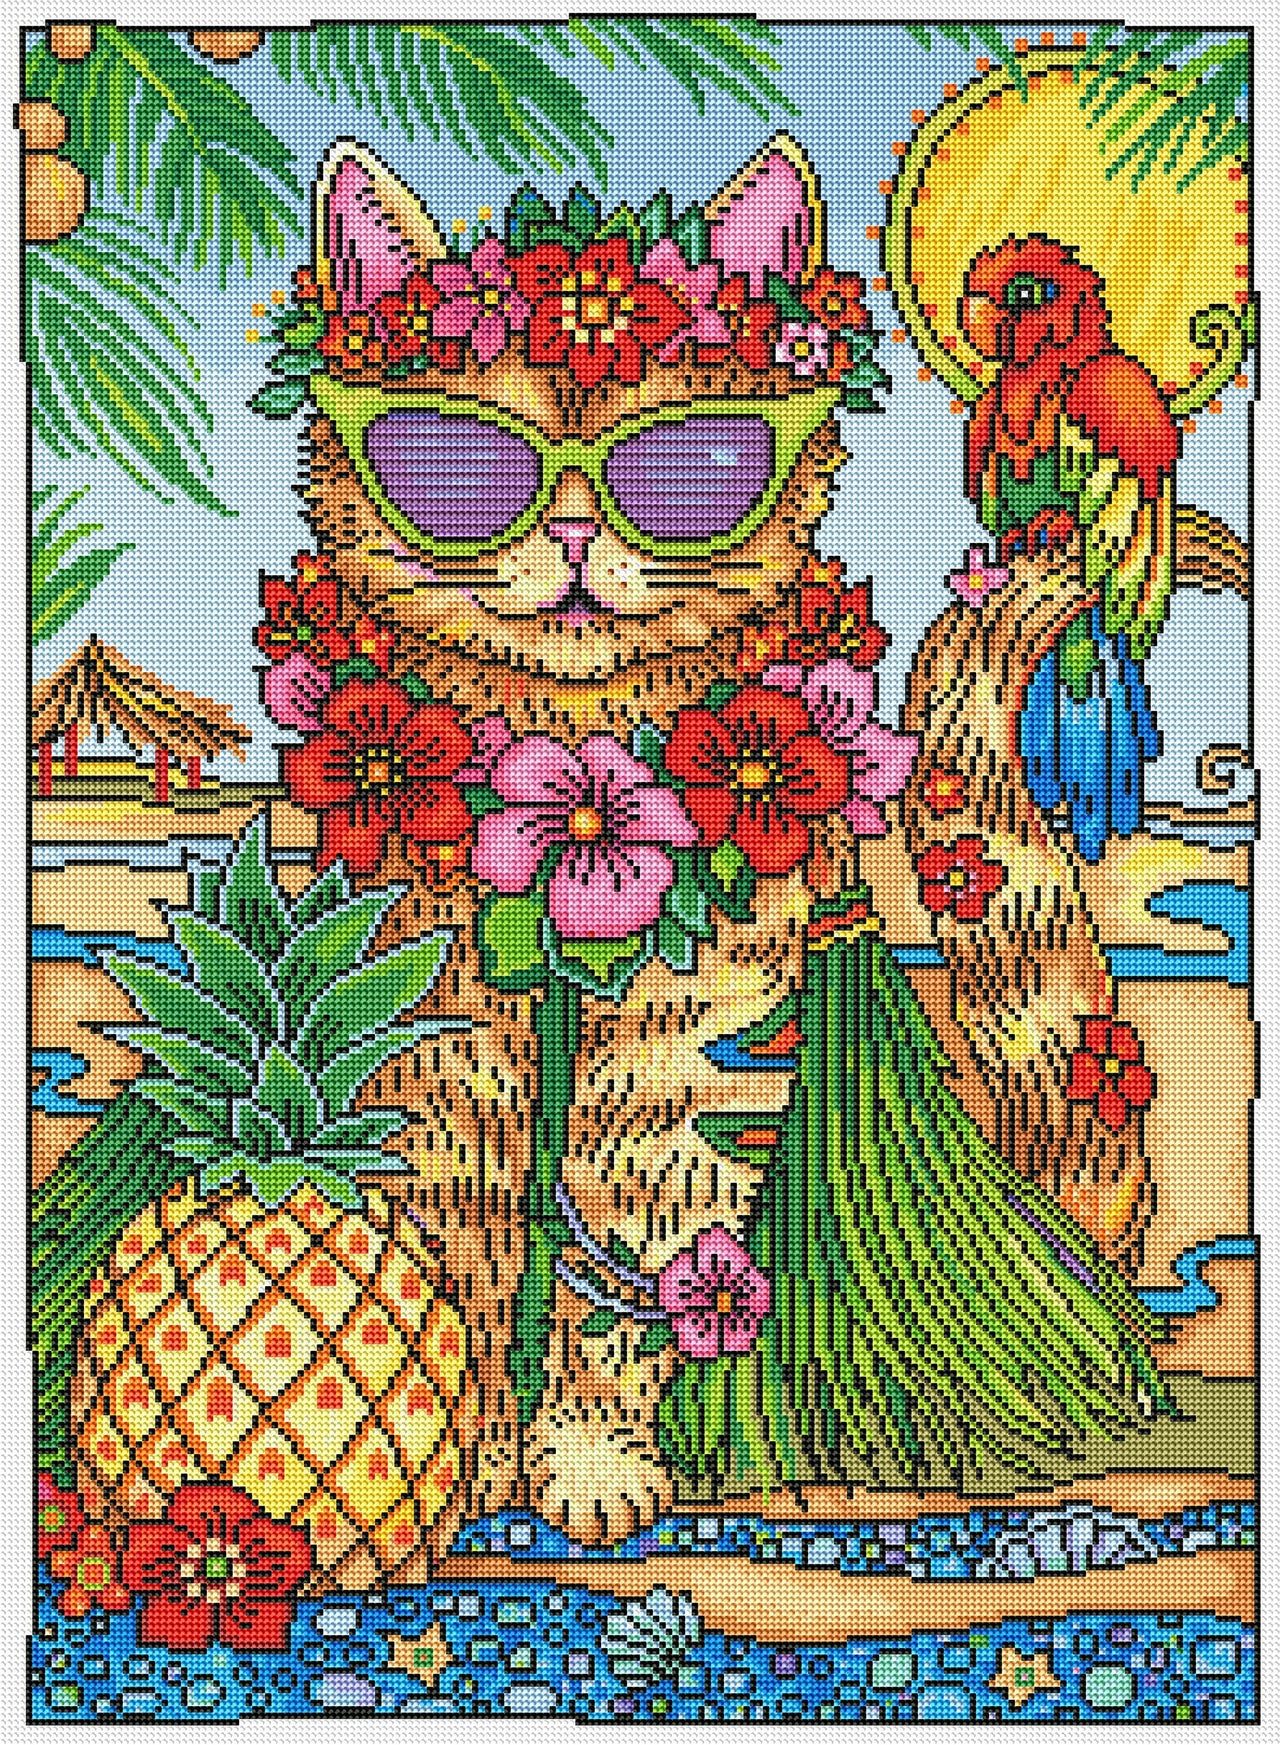 Diamond Painting Hawaiian Cat 22" x 30″ (56cm x 76cm) / Round with 41 Colors including 2 ABs / 53,460